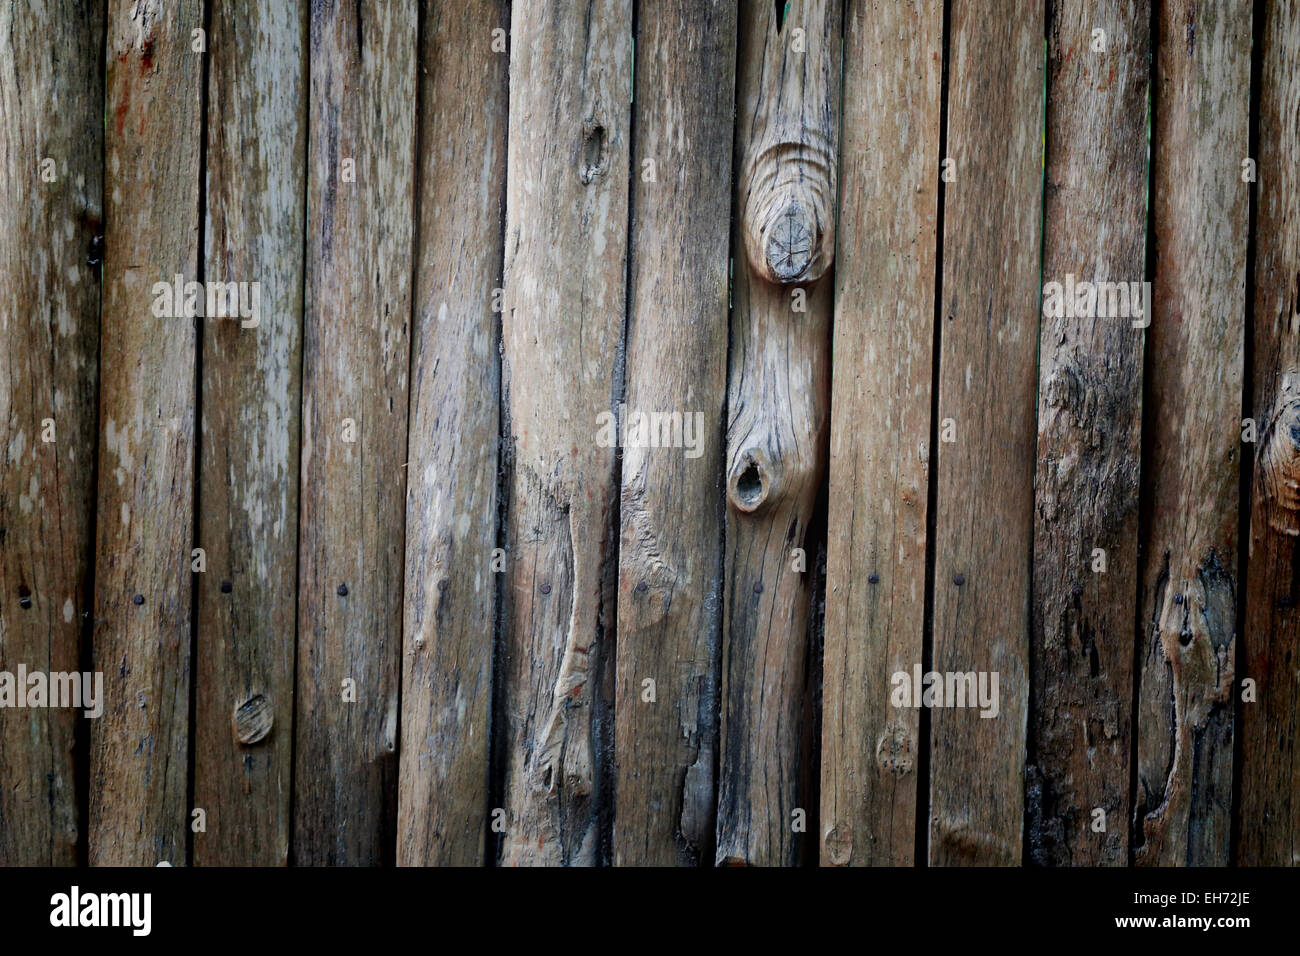 Old wooden wall for background image. Stock Photo